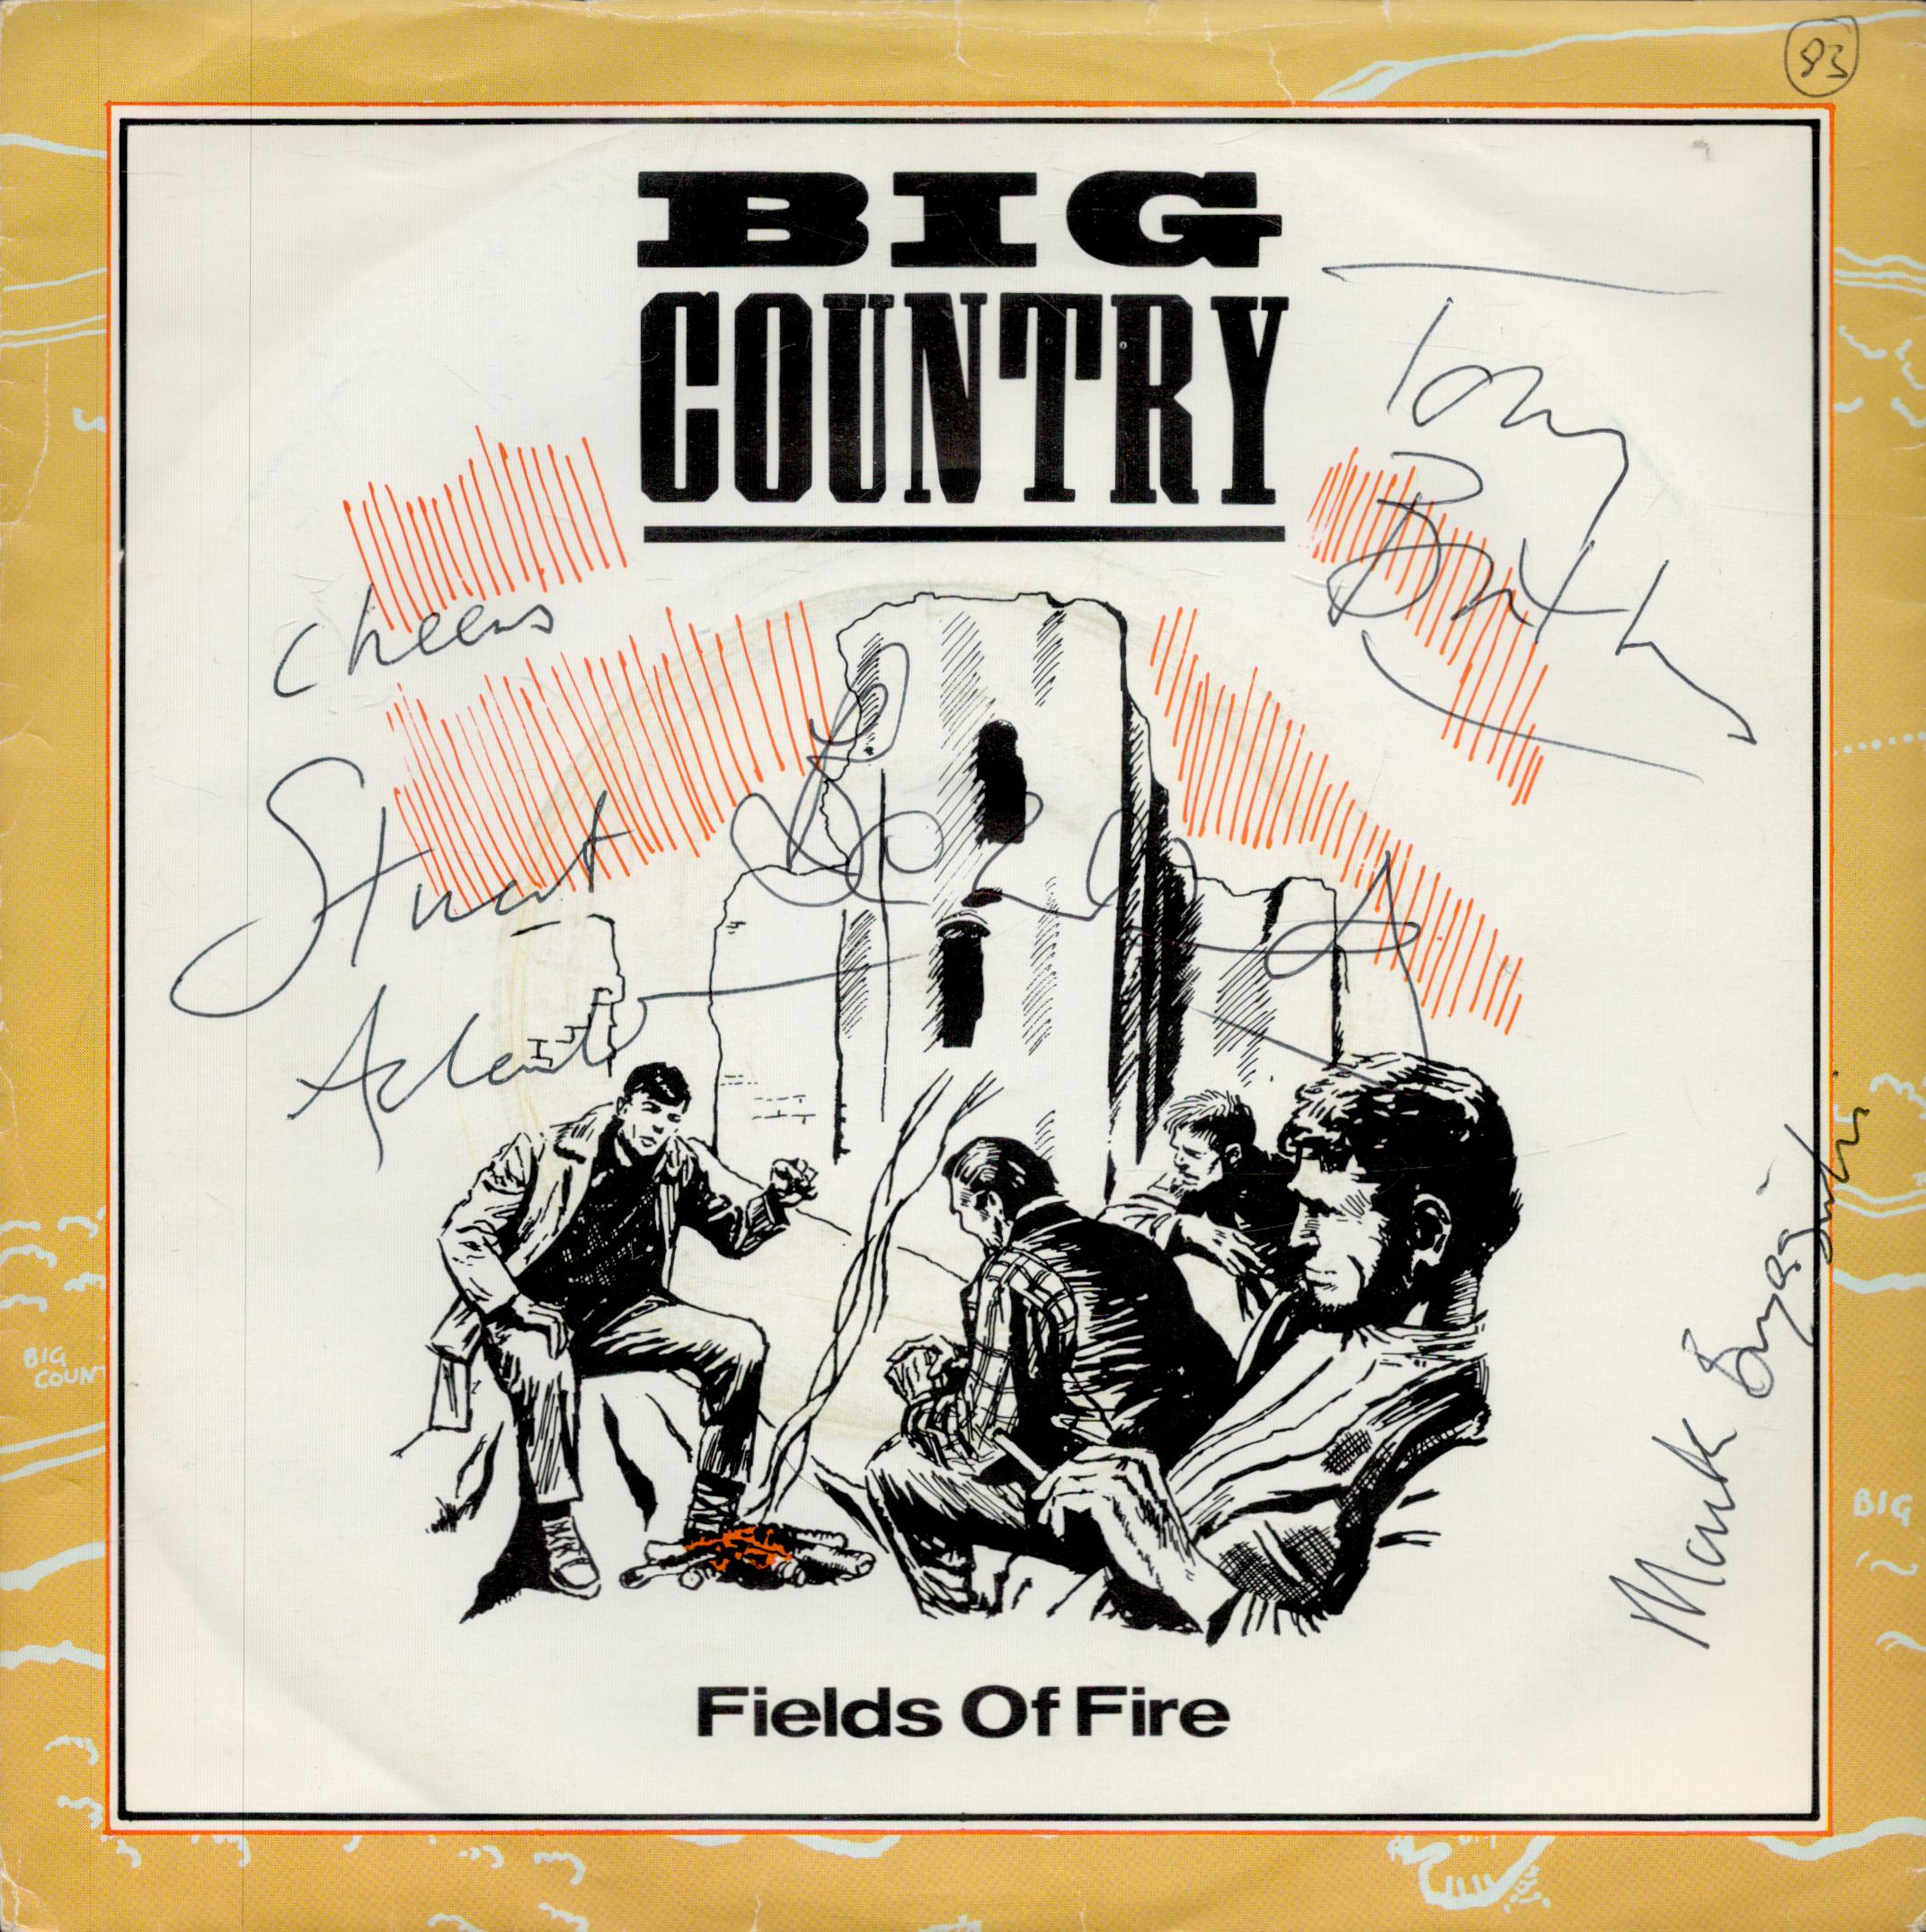 Big Country, Scottish rock band. 'Fields Of Fire', 7" single signed to front cover by the four